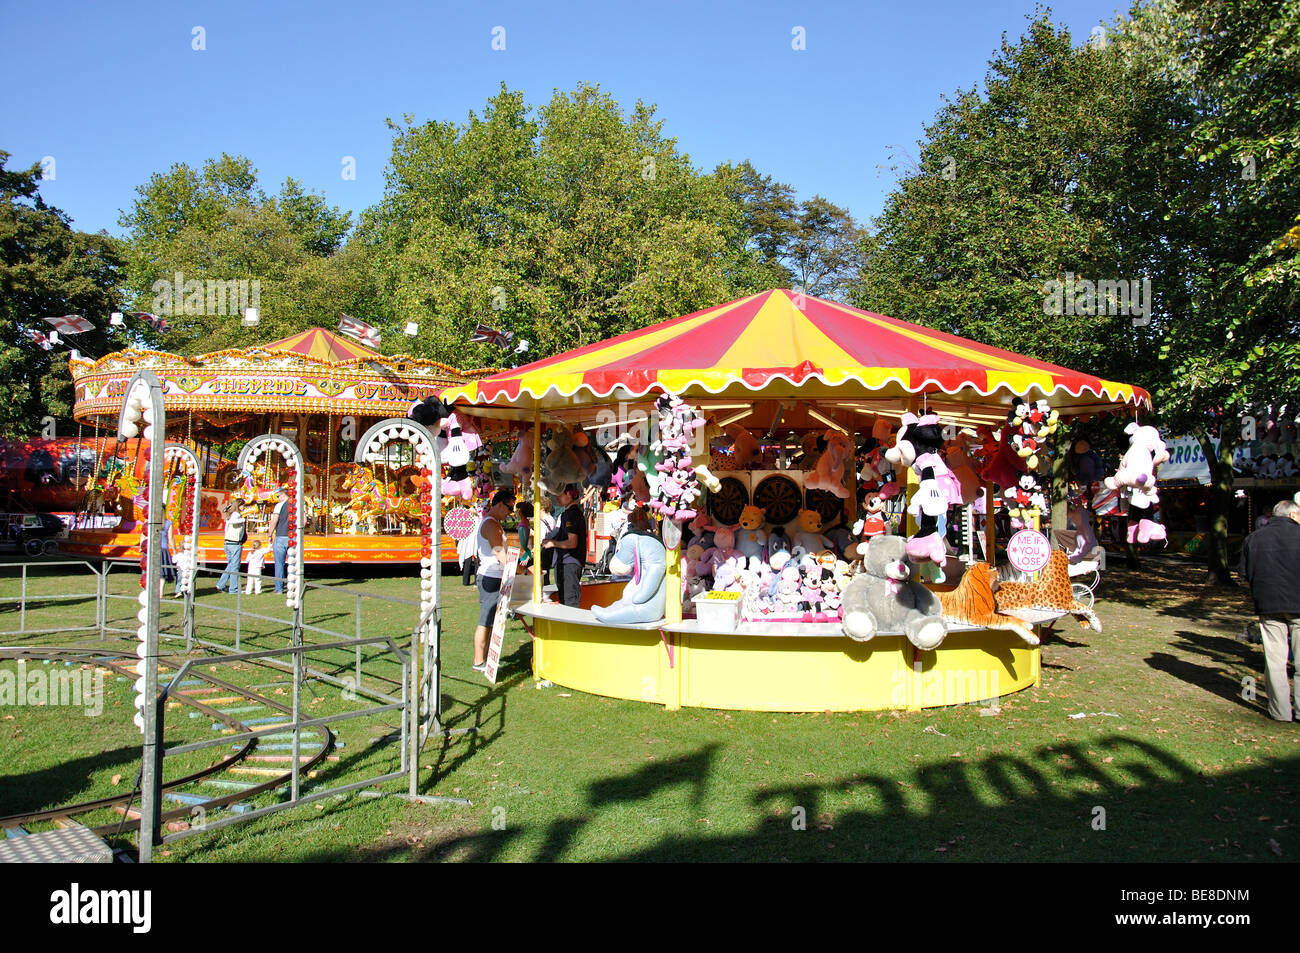 Fête foraine sur vert, Chiswick High Road, Chiswick, London Borough of London, Greater London, Angleterre, Royaume-Uni Banque D'Images